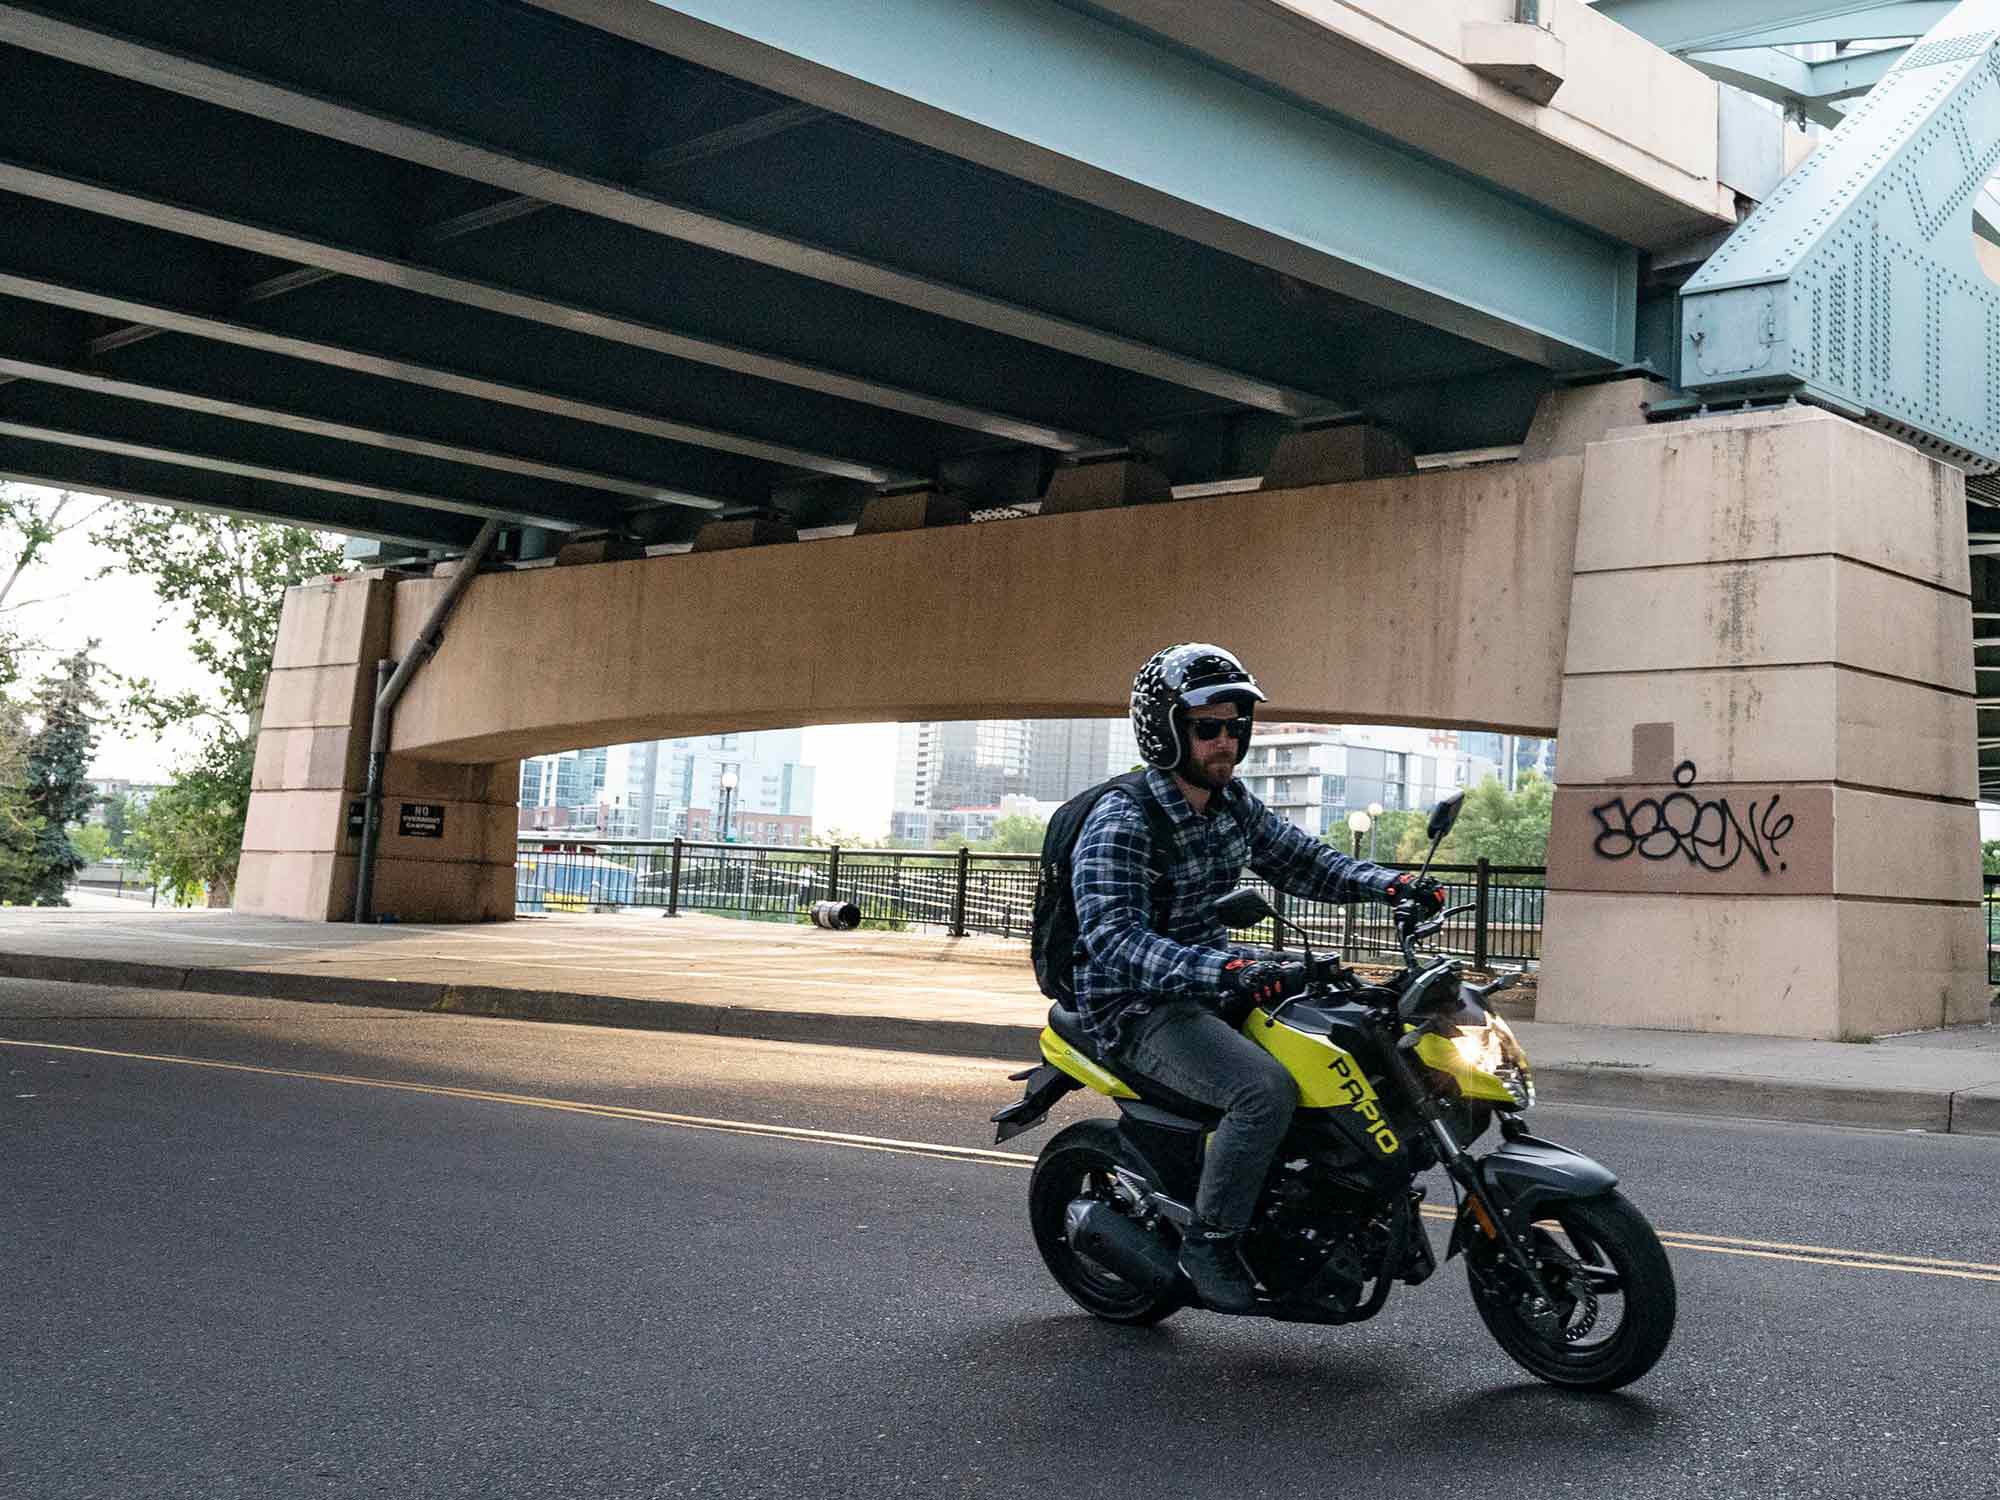 Mini motos like the Papio are great for running neighborhood errands, transportation at the RV park, and even getting up to speed as a new rider.